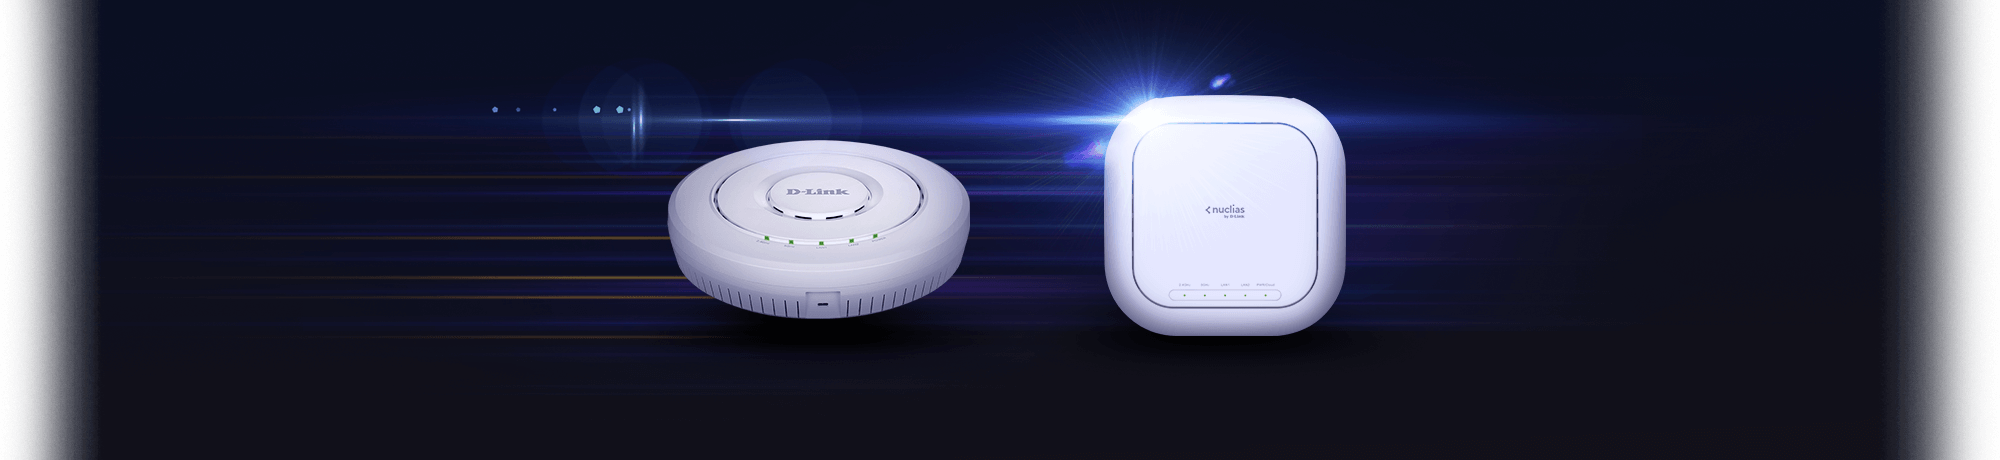 D-Link access points on a black background with white lens flare.